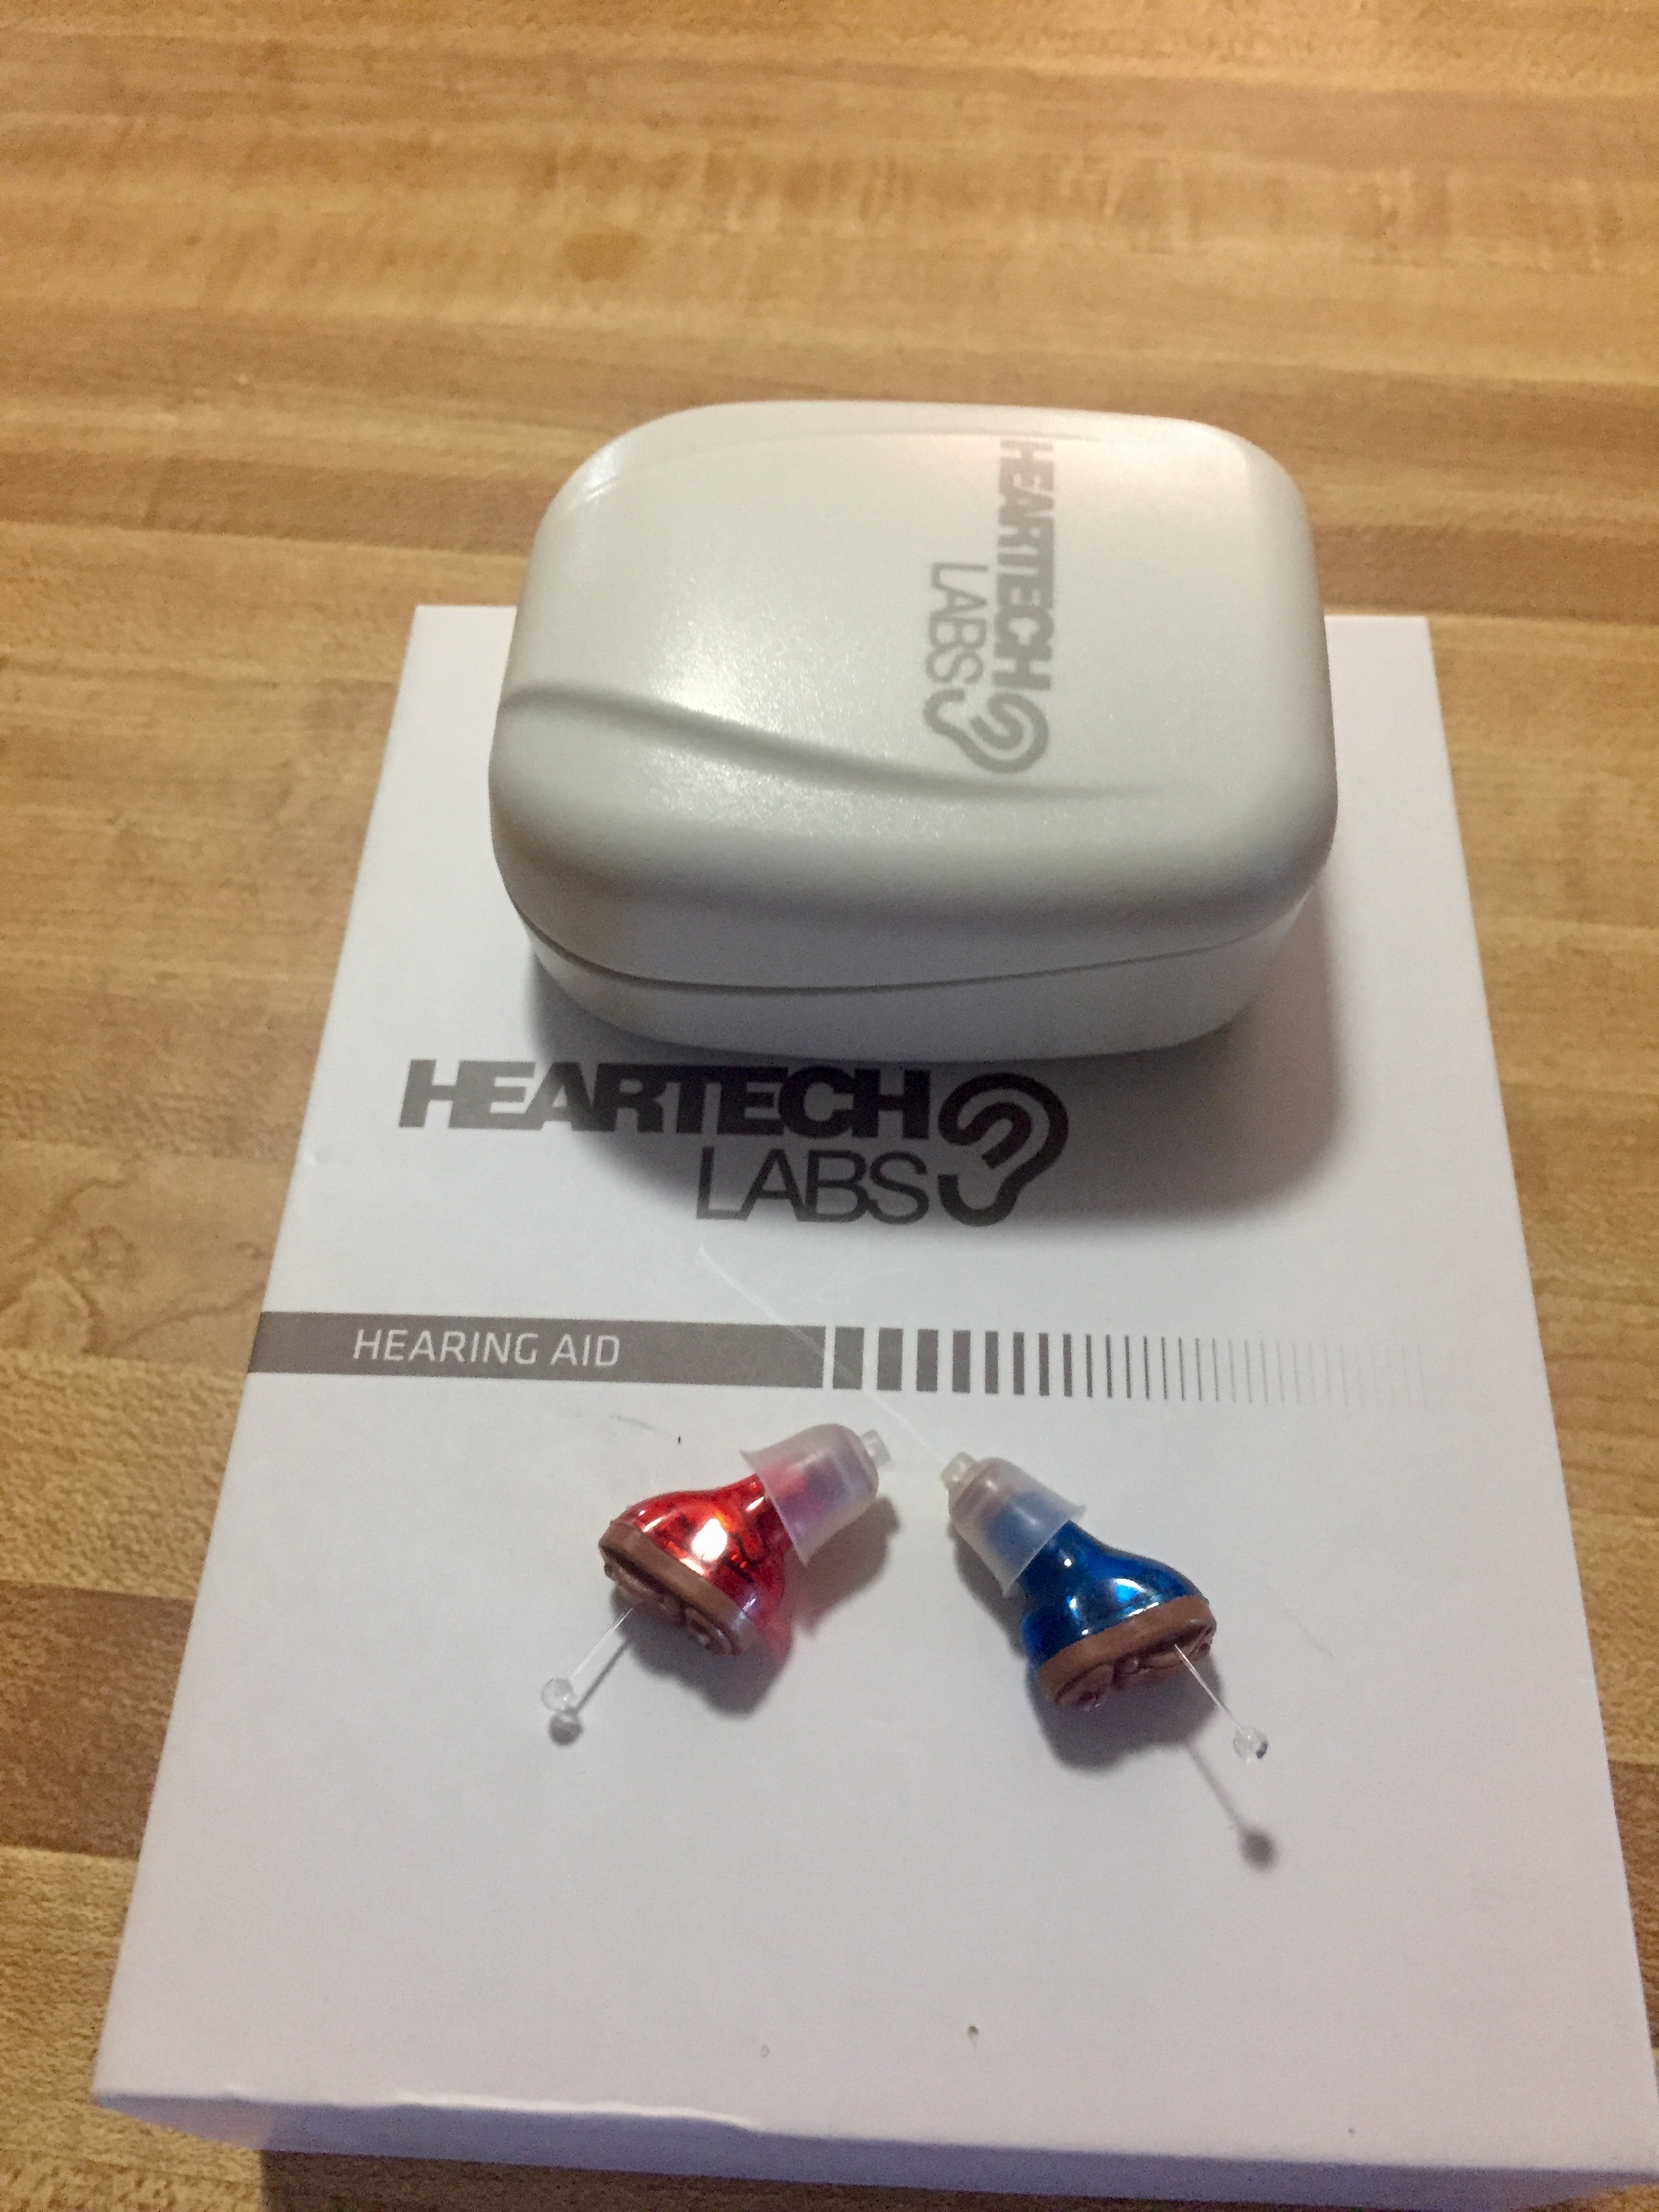 Heartech labs hearing aid